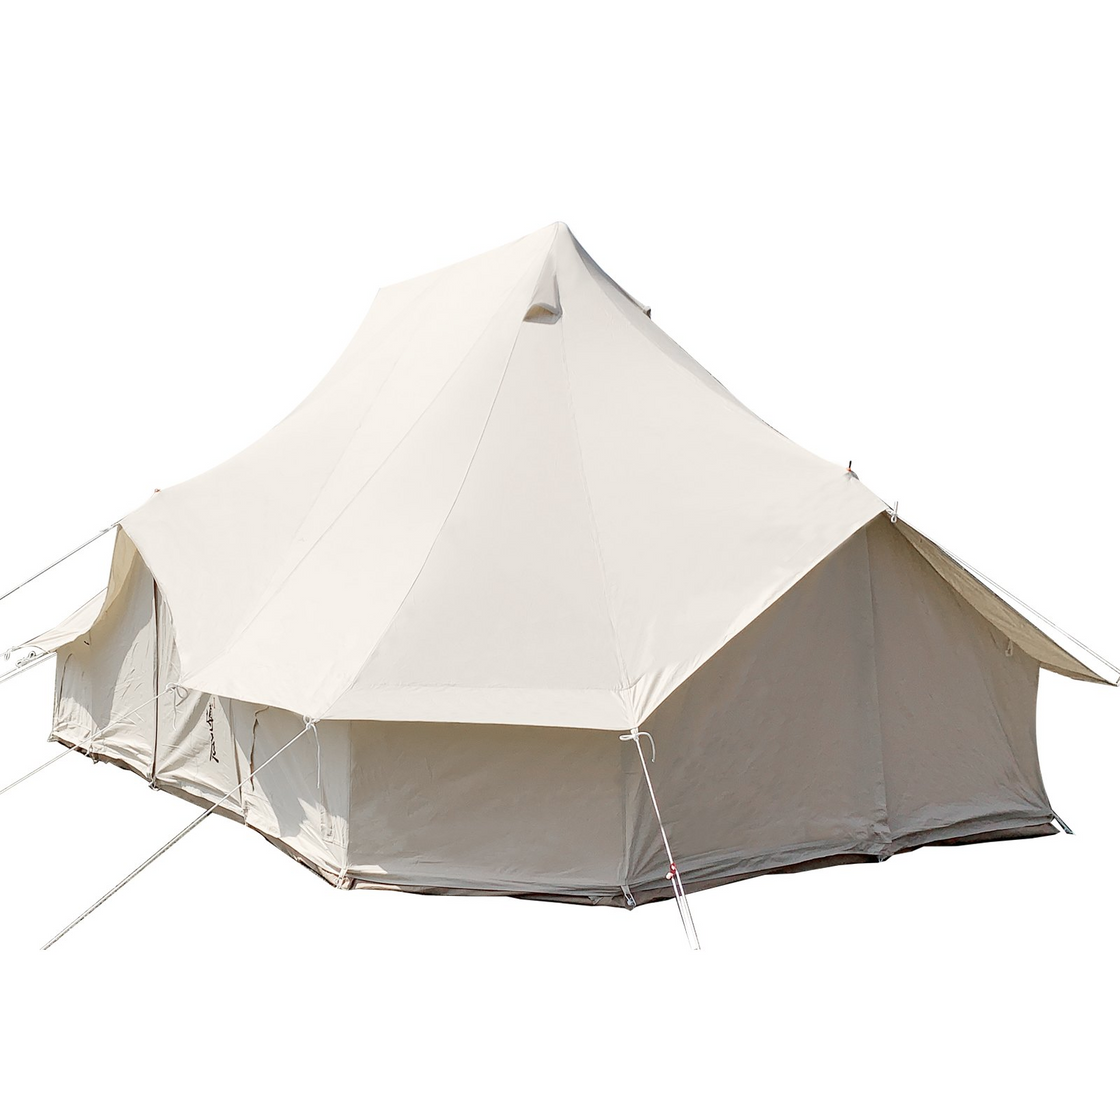 VEVOR 6m Bell Tent 19.7x13.1x9.8 ft Yurt Beige Canvas Tent Cotton Glamping Tents 8-12 Person 4 Season Teepee Tent Portable for Adults Luxury Safari Tent for Family Outdoor Camping Lightweight